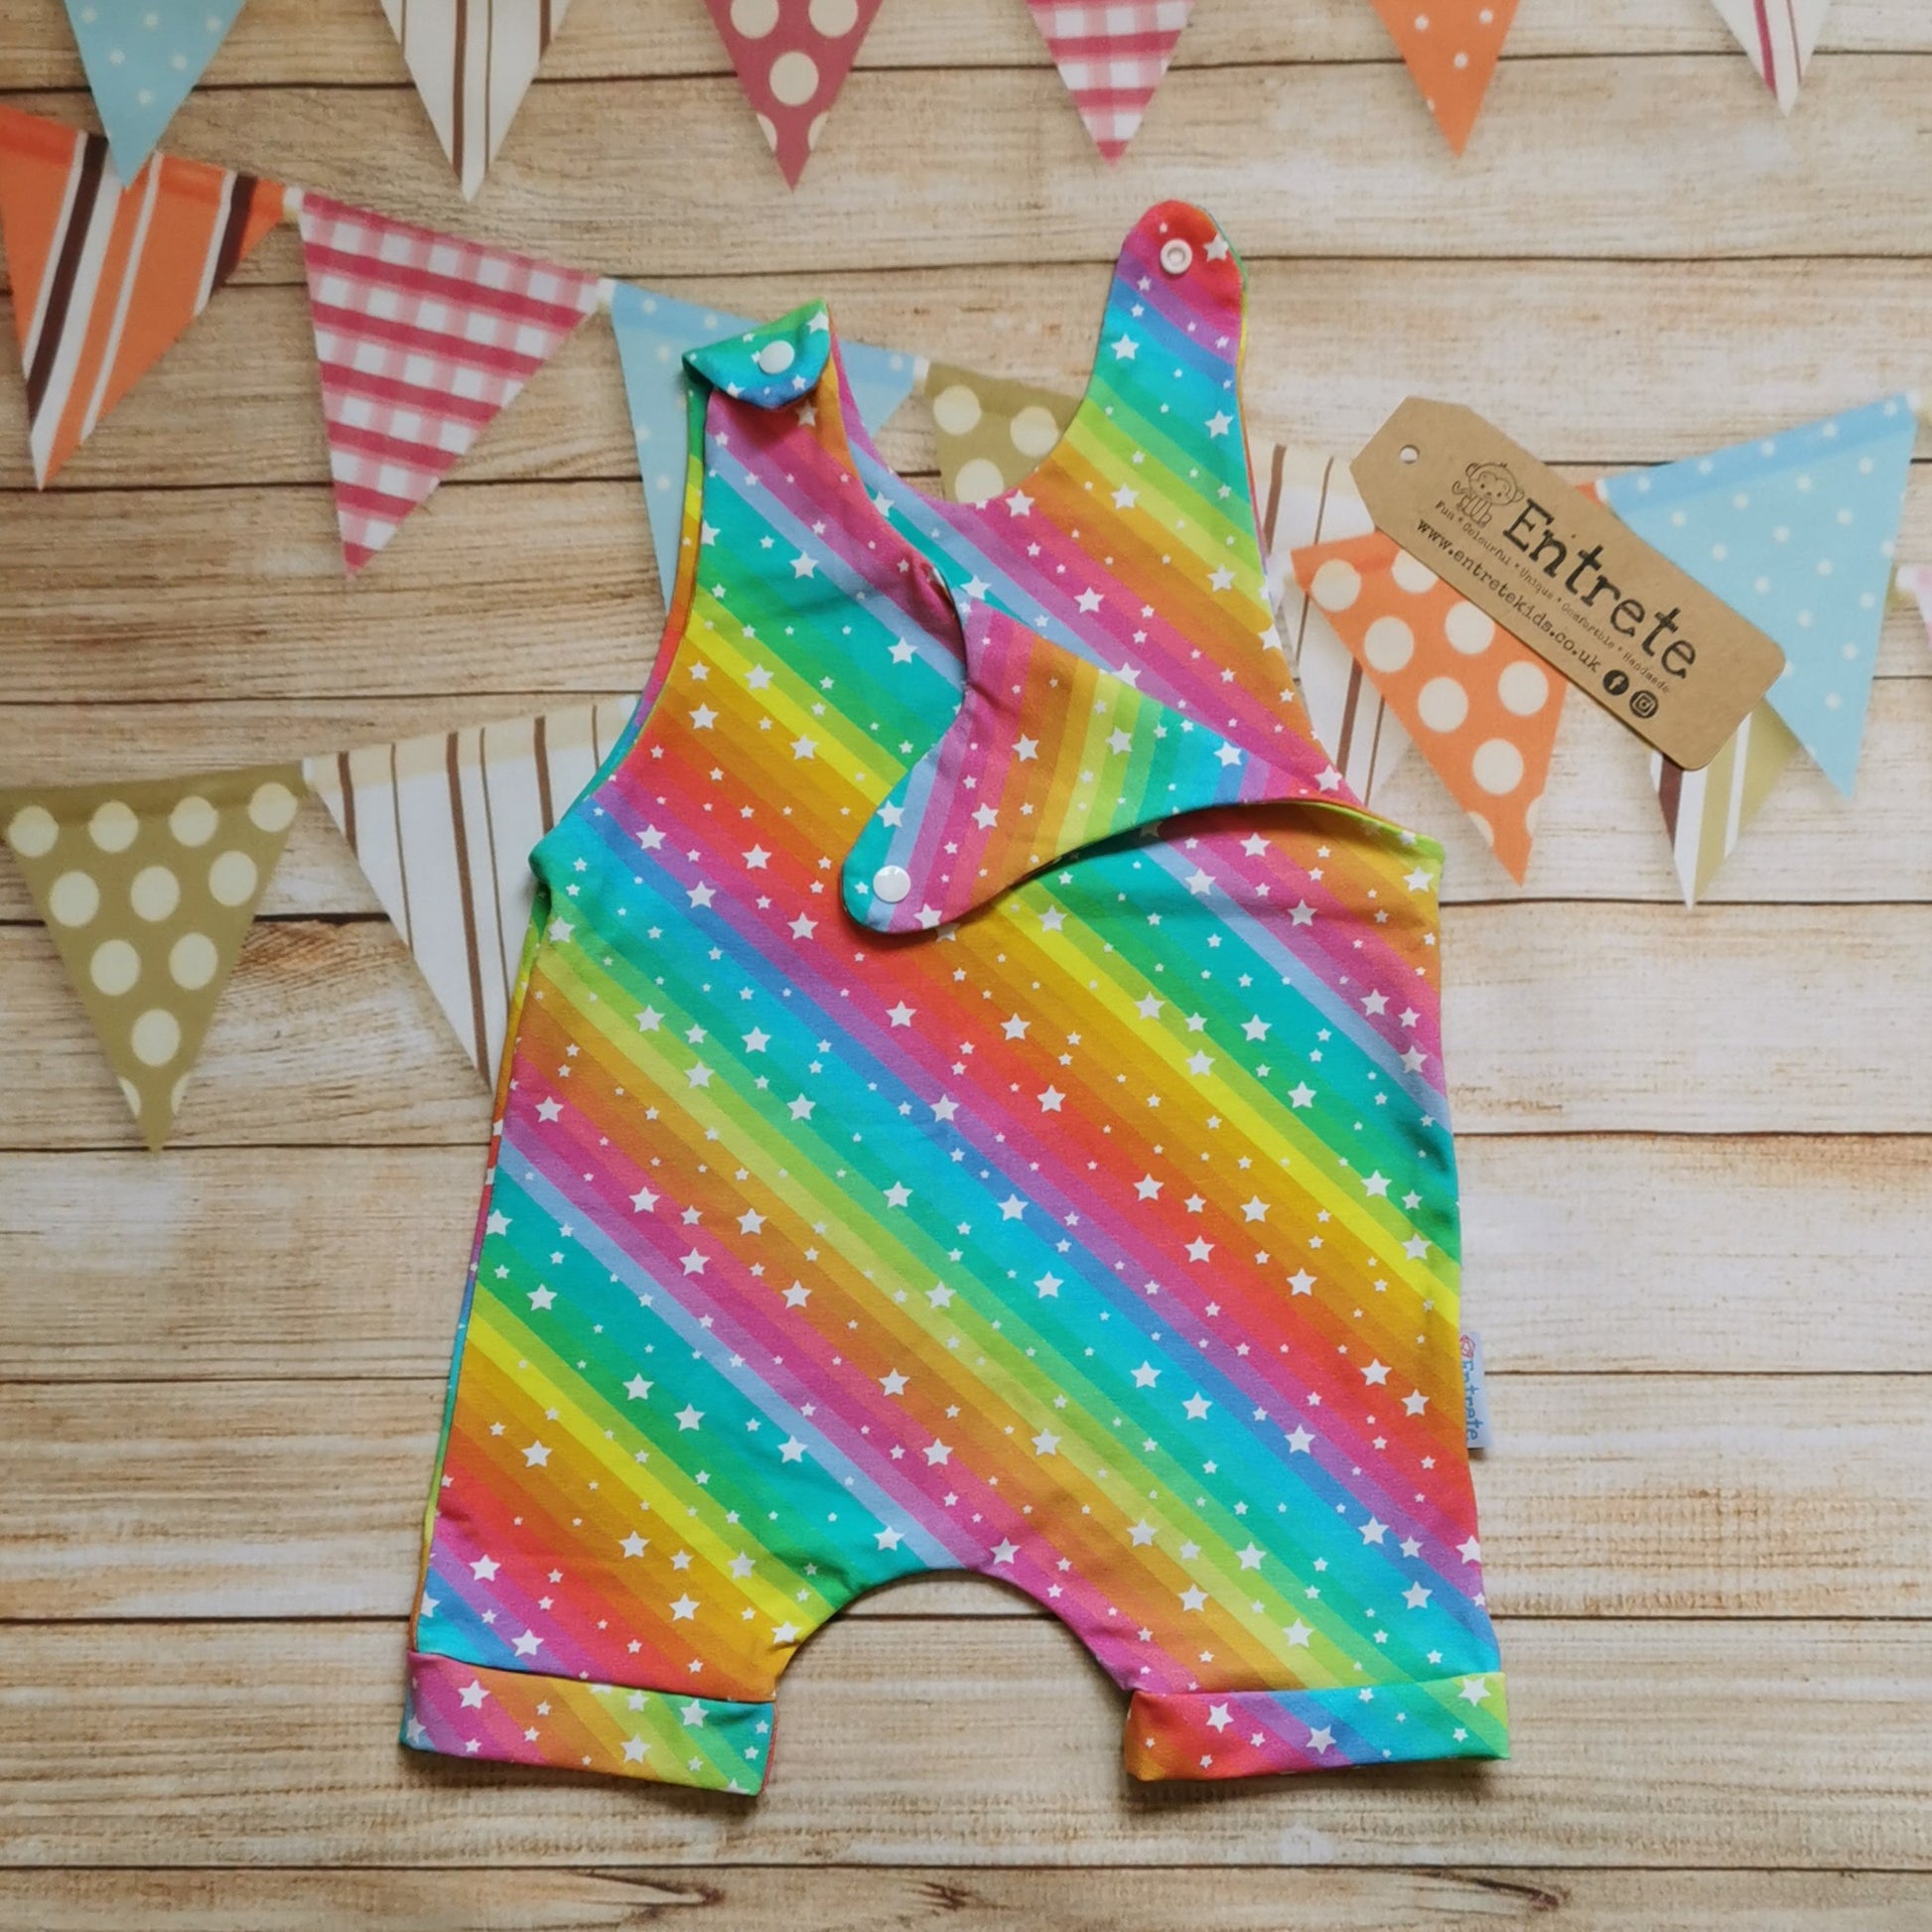 Girls & Babies romper shorts, handmade in the vivid and bright rainbow stars cotton jersey. Shown with one shoulder open.